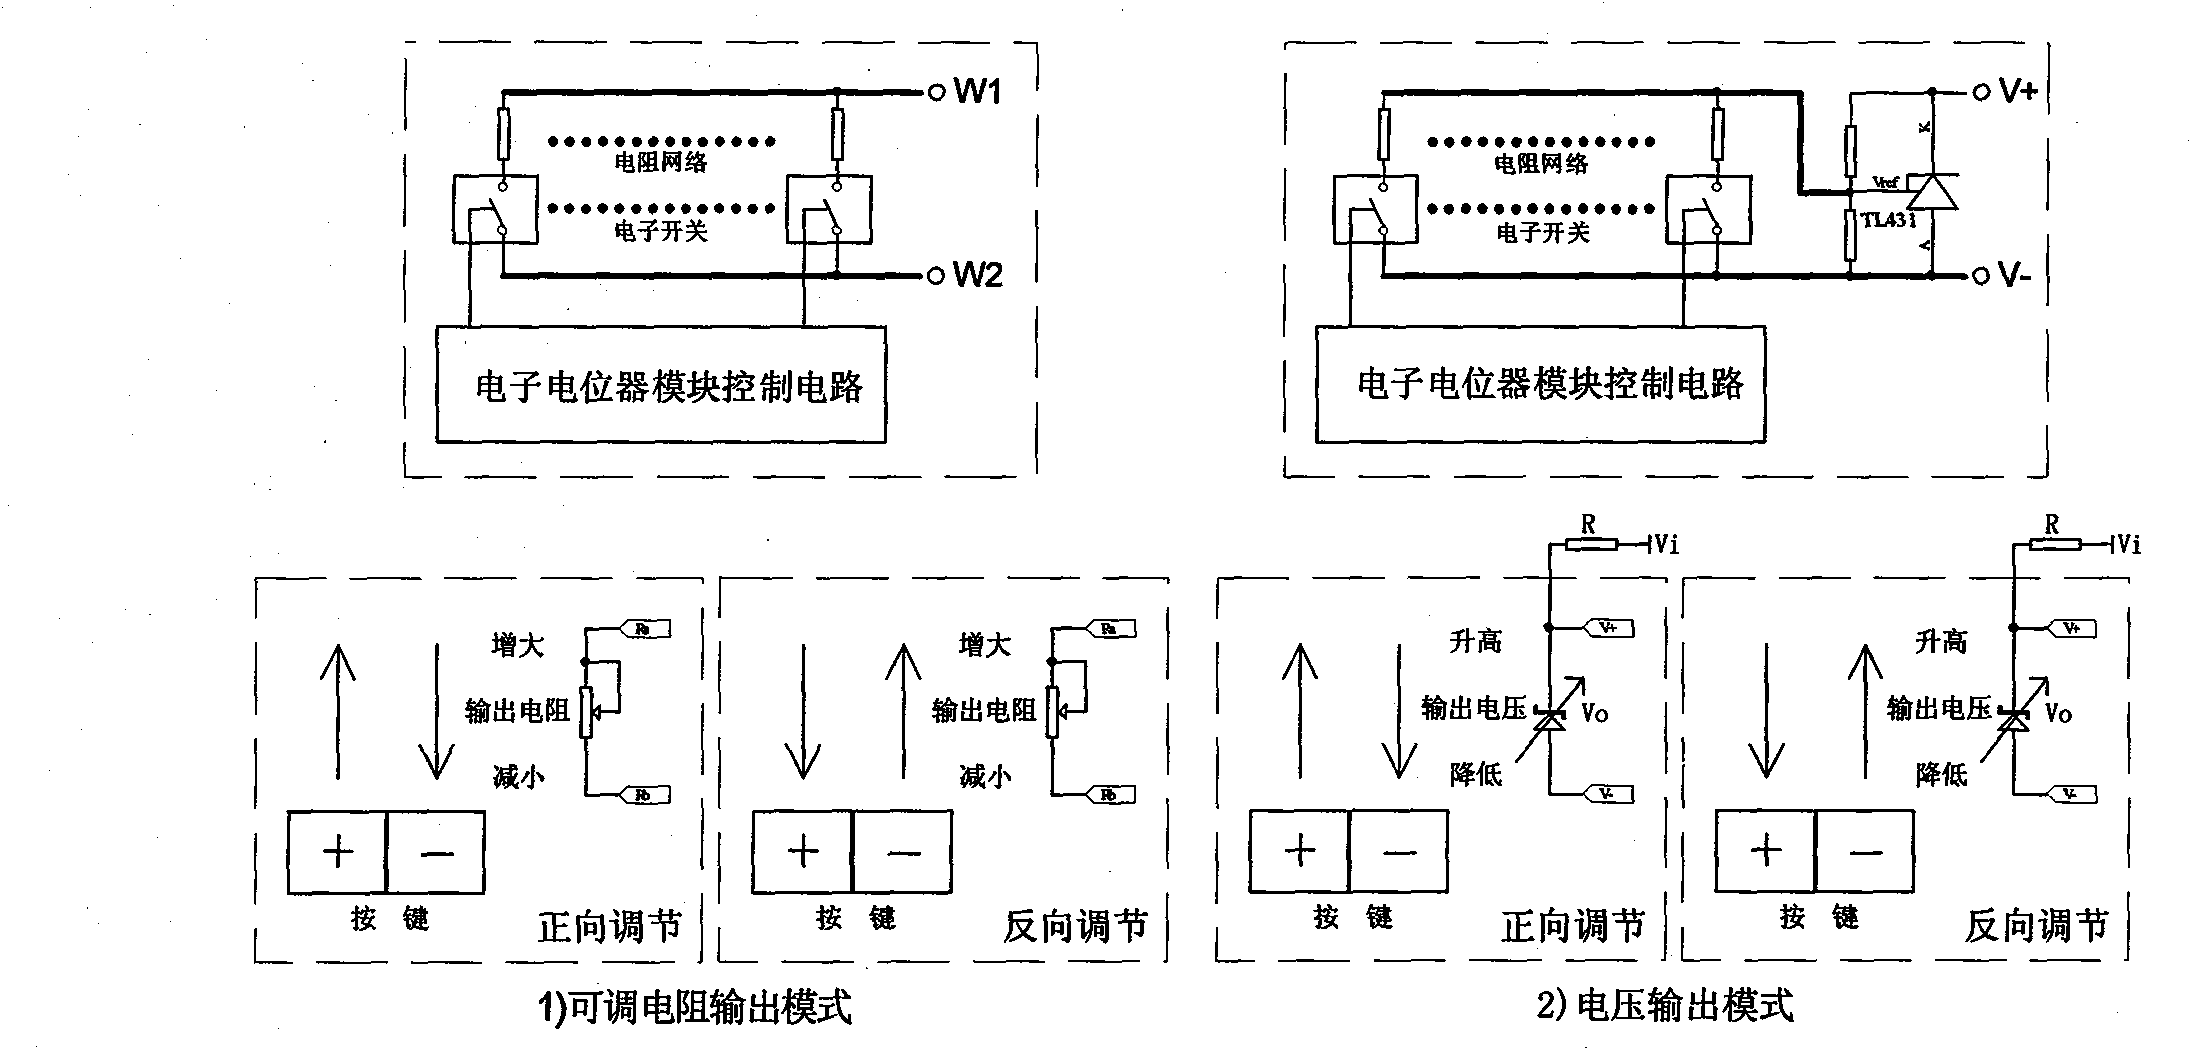 Application of electronic potentiometer module in direct current stabilized voltage power supply